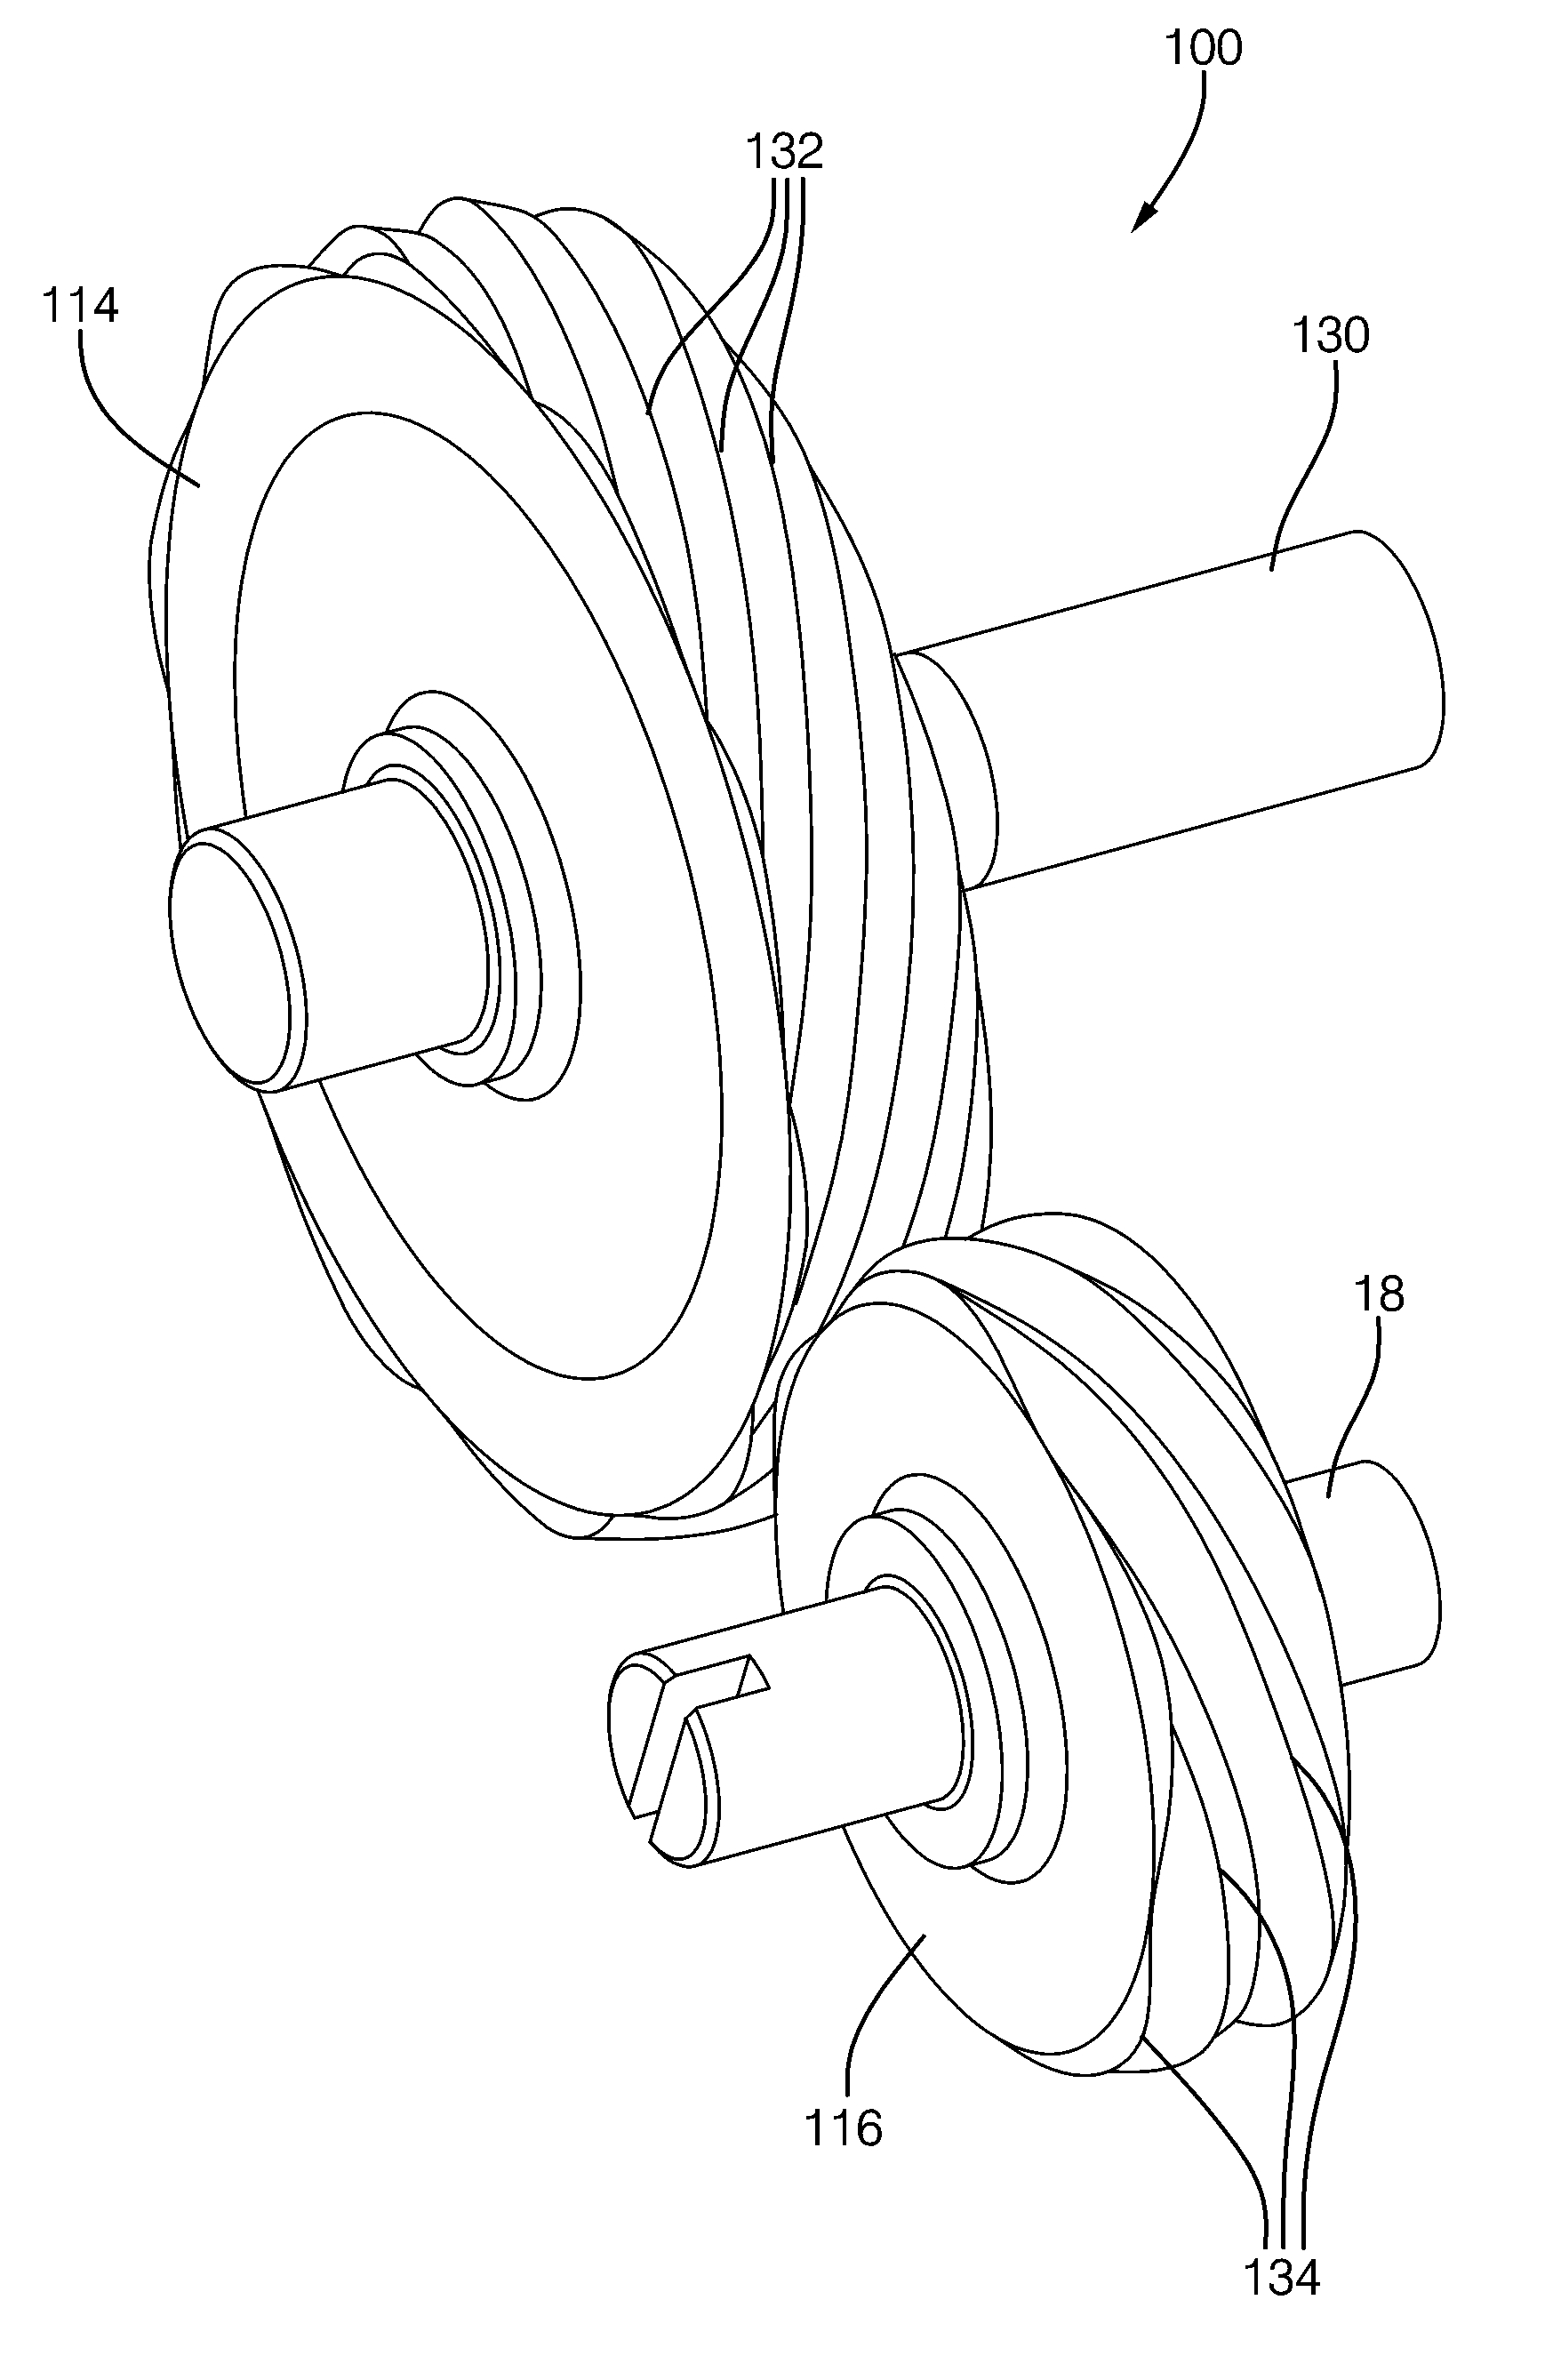 Actuator with self-locking helical gears for a continuously variable valve lift system